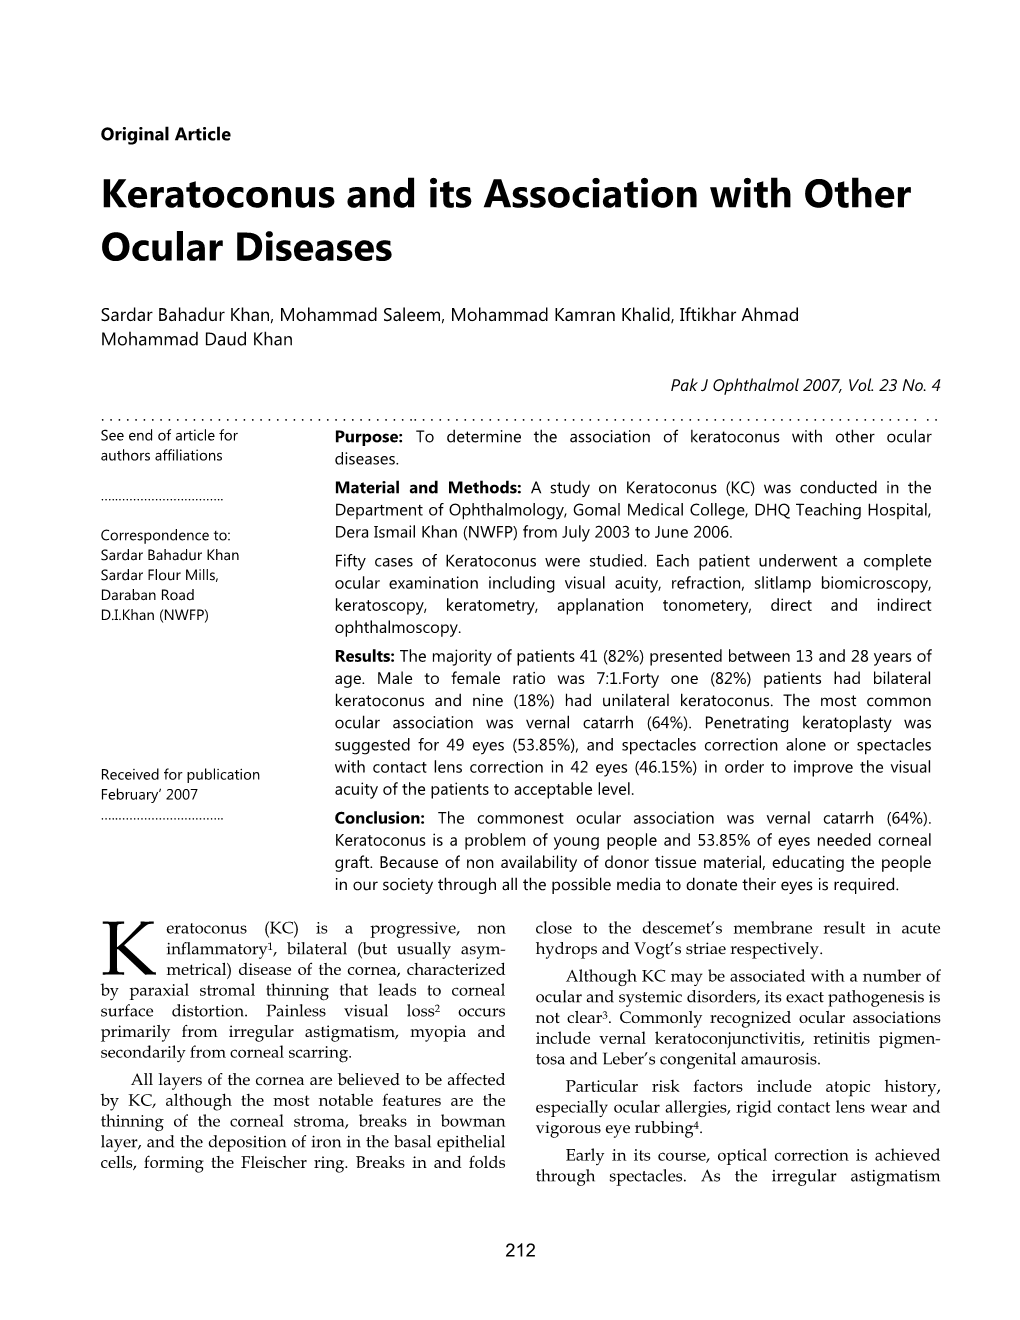 Keratoconus and Its Association with Other Ocular Diseases